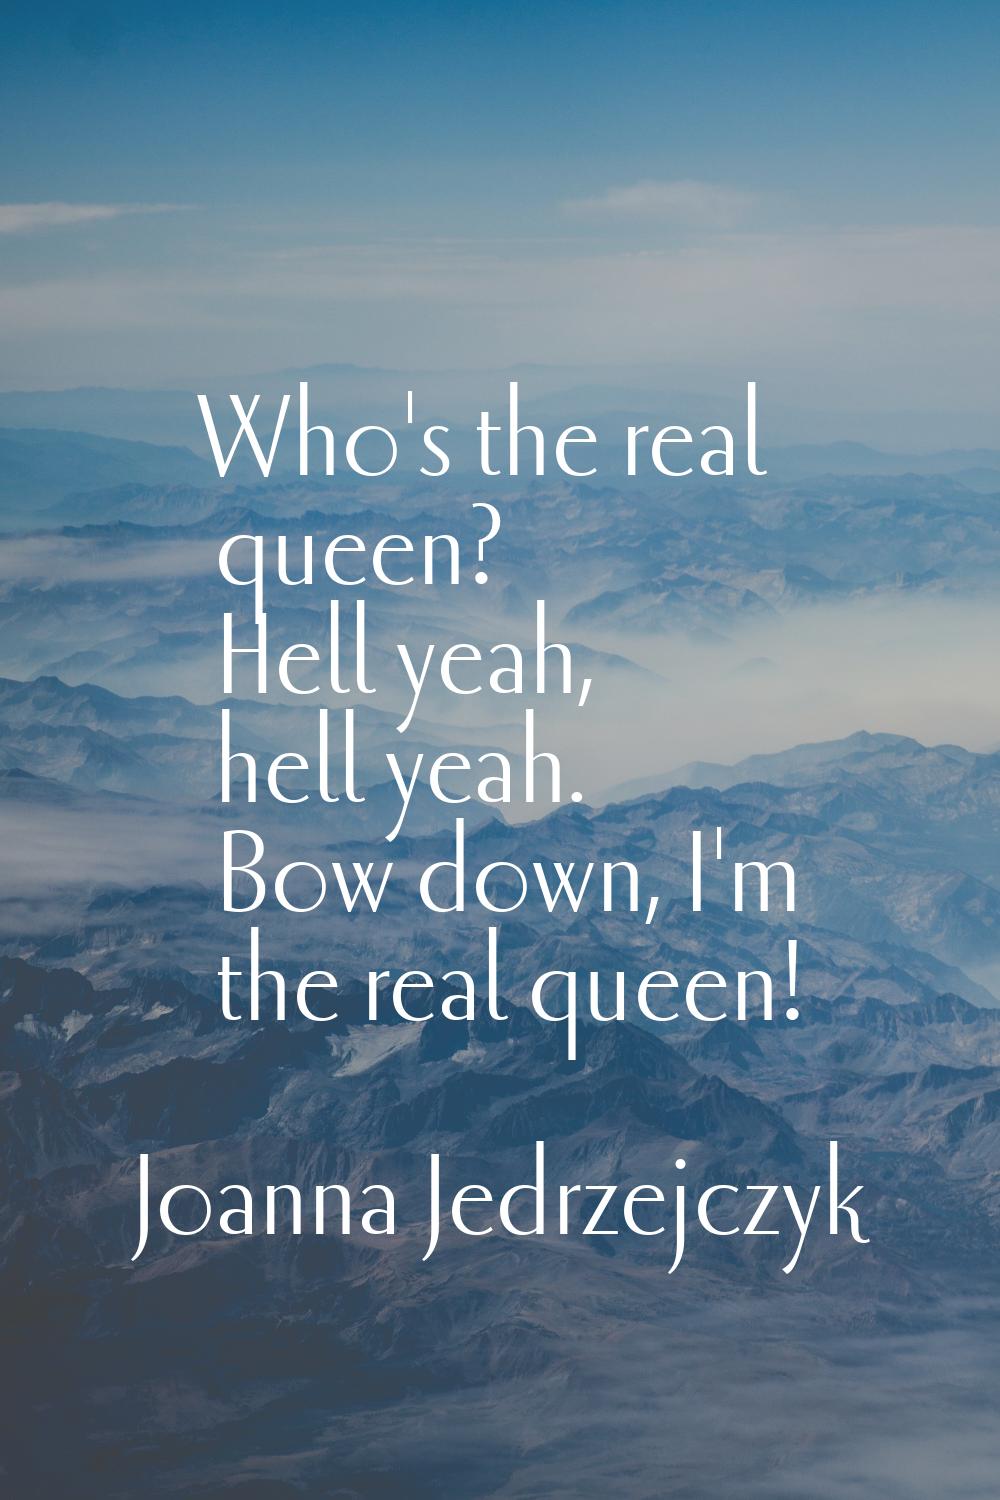 Who's the real queen? Hell yeah, hell yeah. Bow down, I'm the real queen!